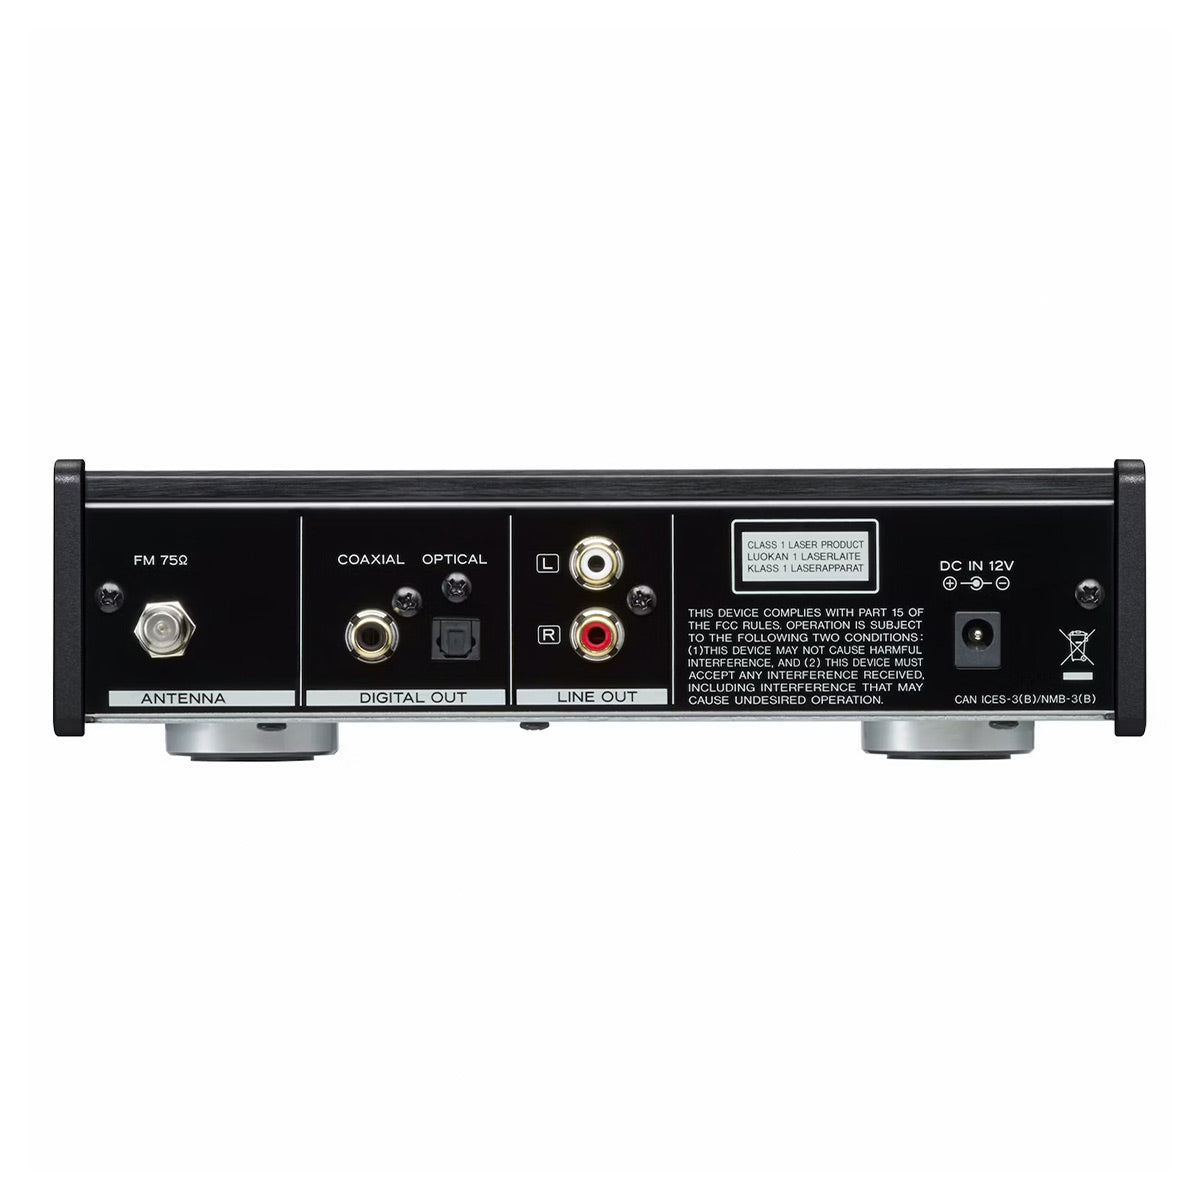 TEAC PD-301-X CD Player with USB Playback and FM Tuner